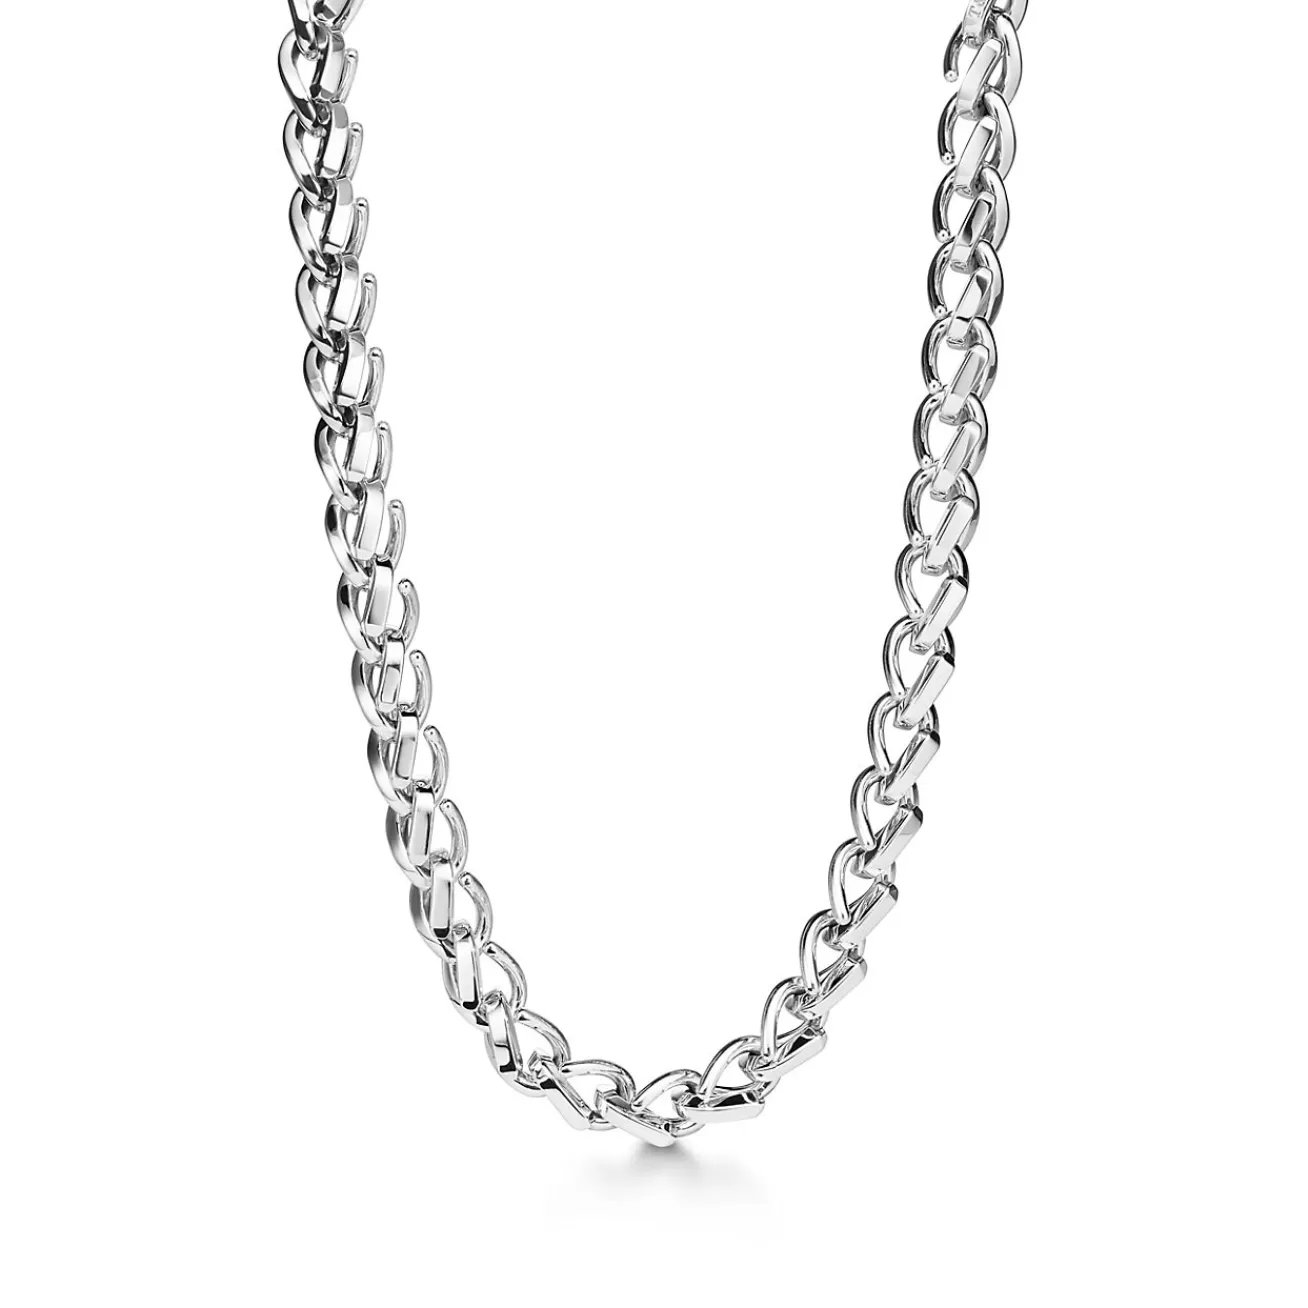 Tiffany & Co. Tiffany Forge Large Link Necklace in High- polished Sterling Silver | ^ Necklaces & Pendants | Men's Jewelry